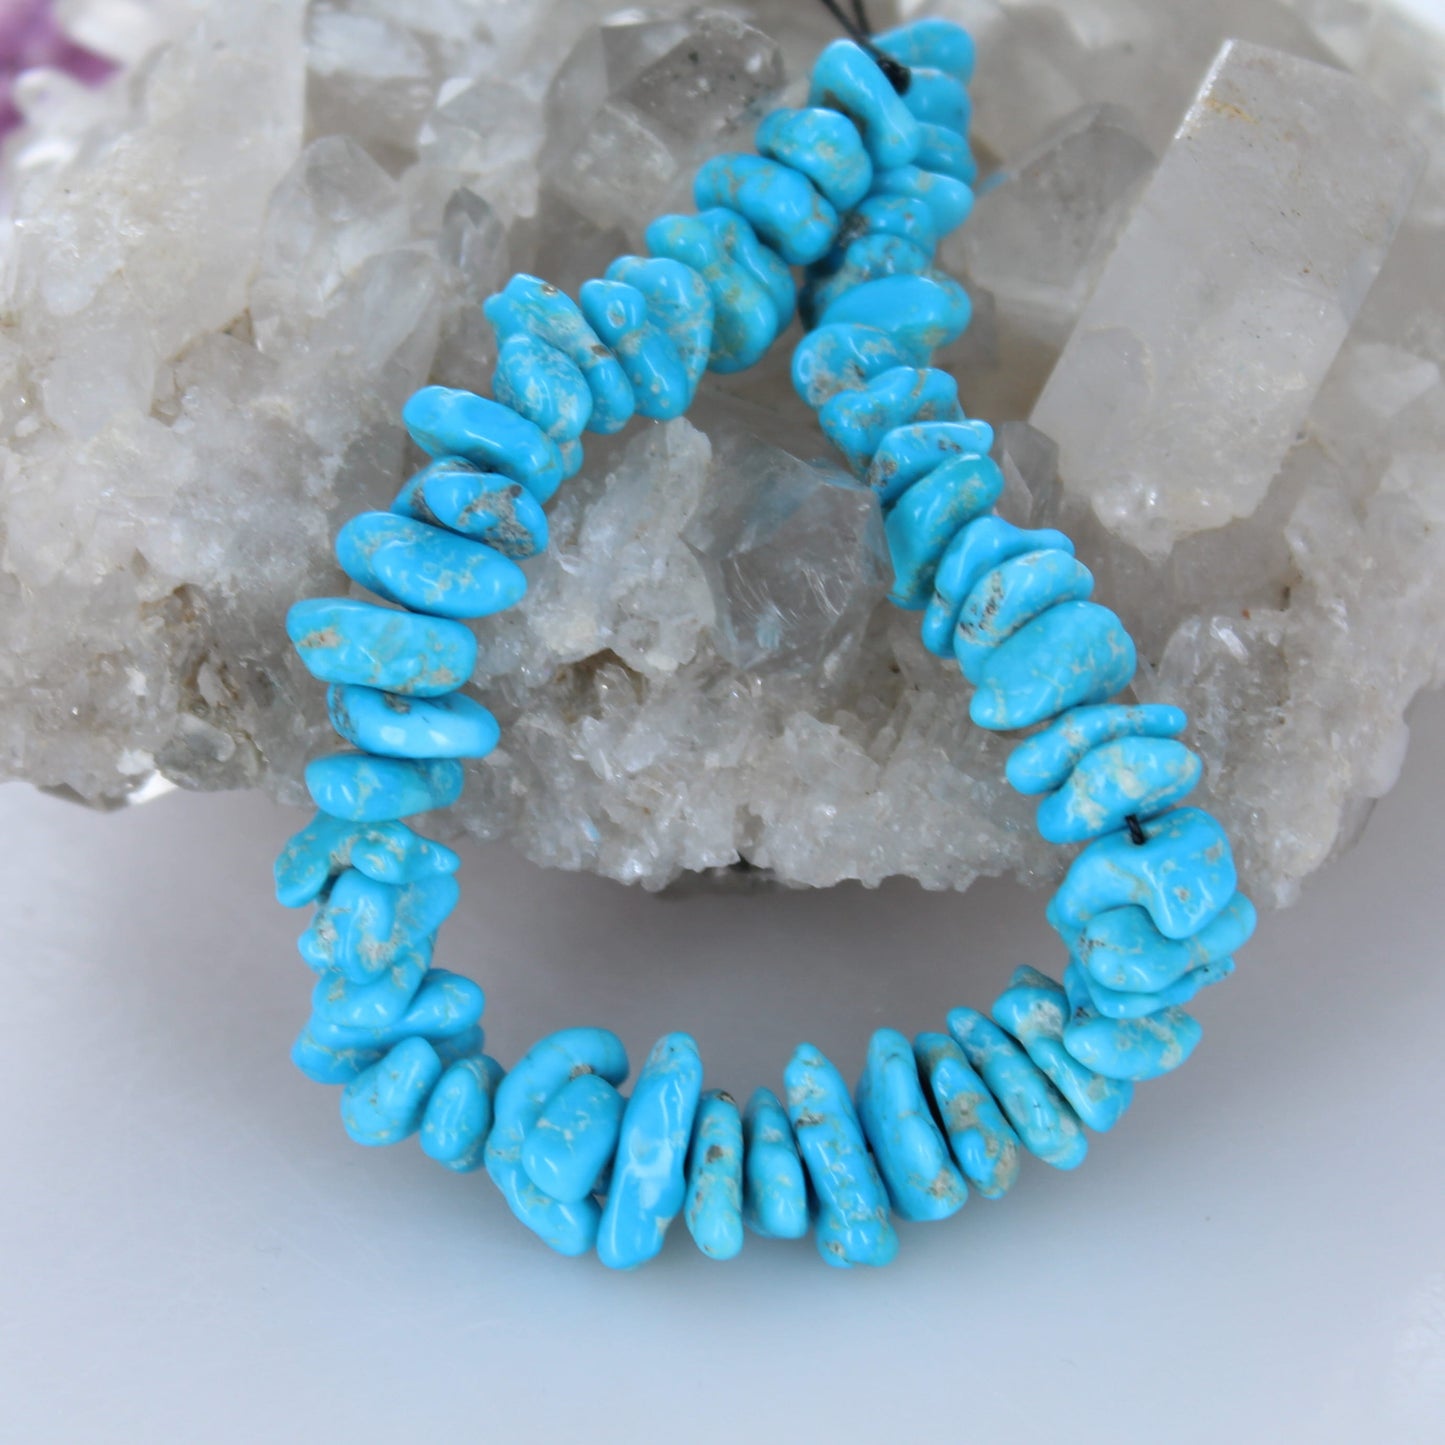 Blue Kingman Turquoise Beads Nuggets 6x8 to 8x10mm 8"